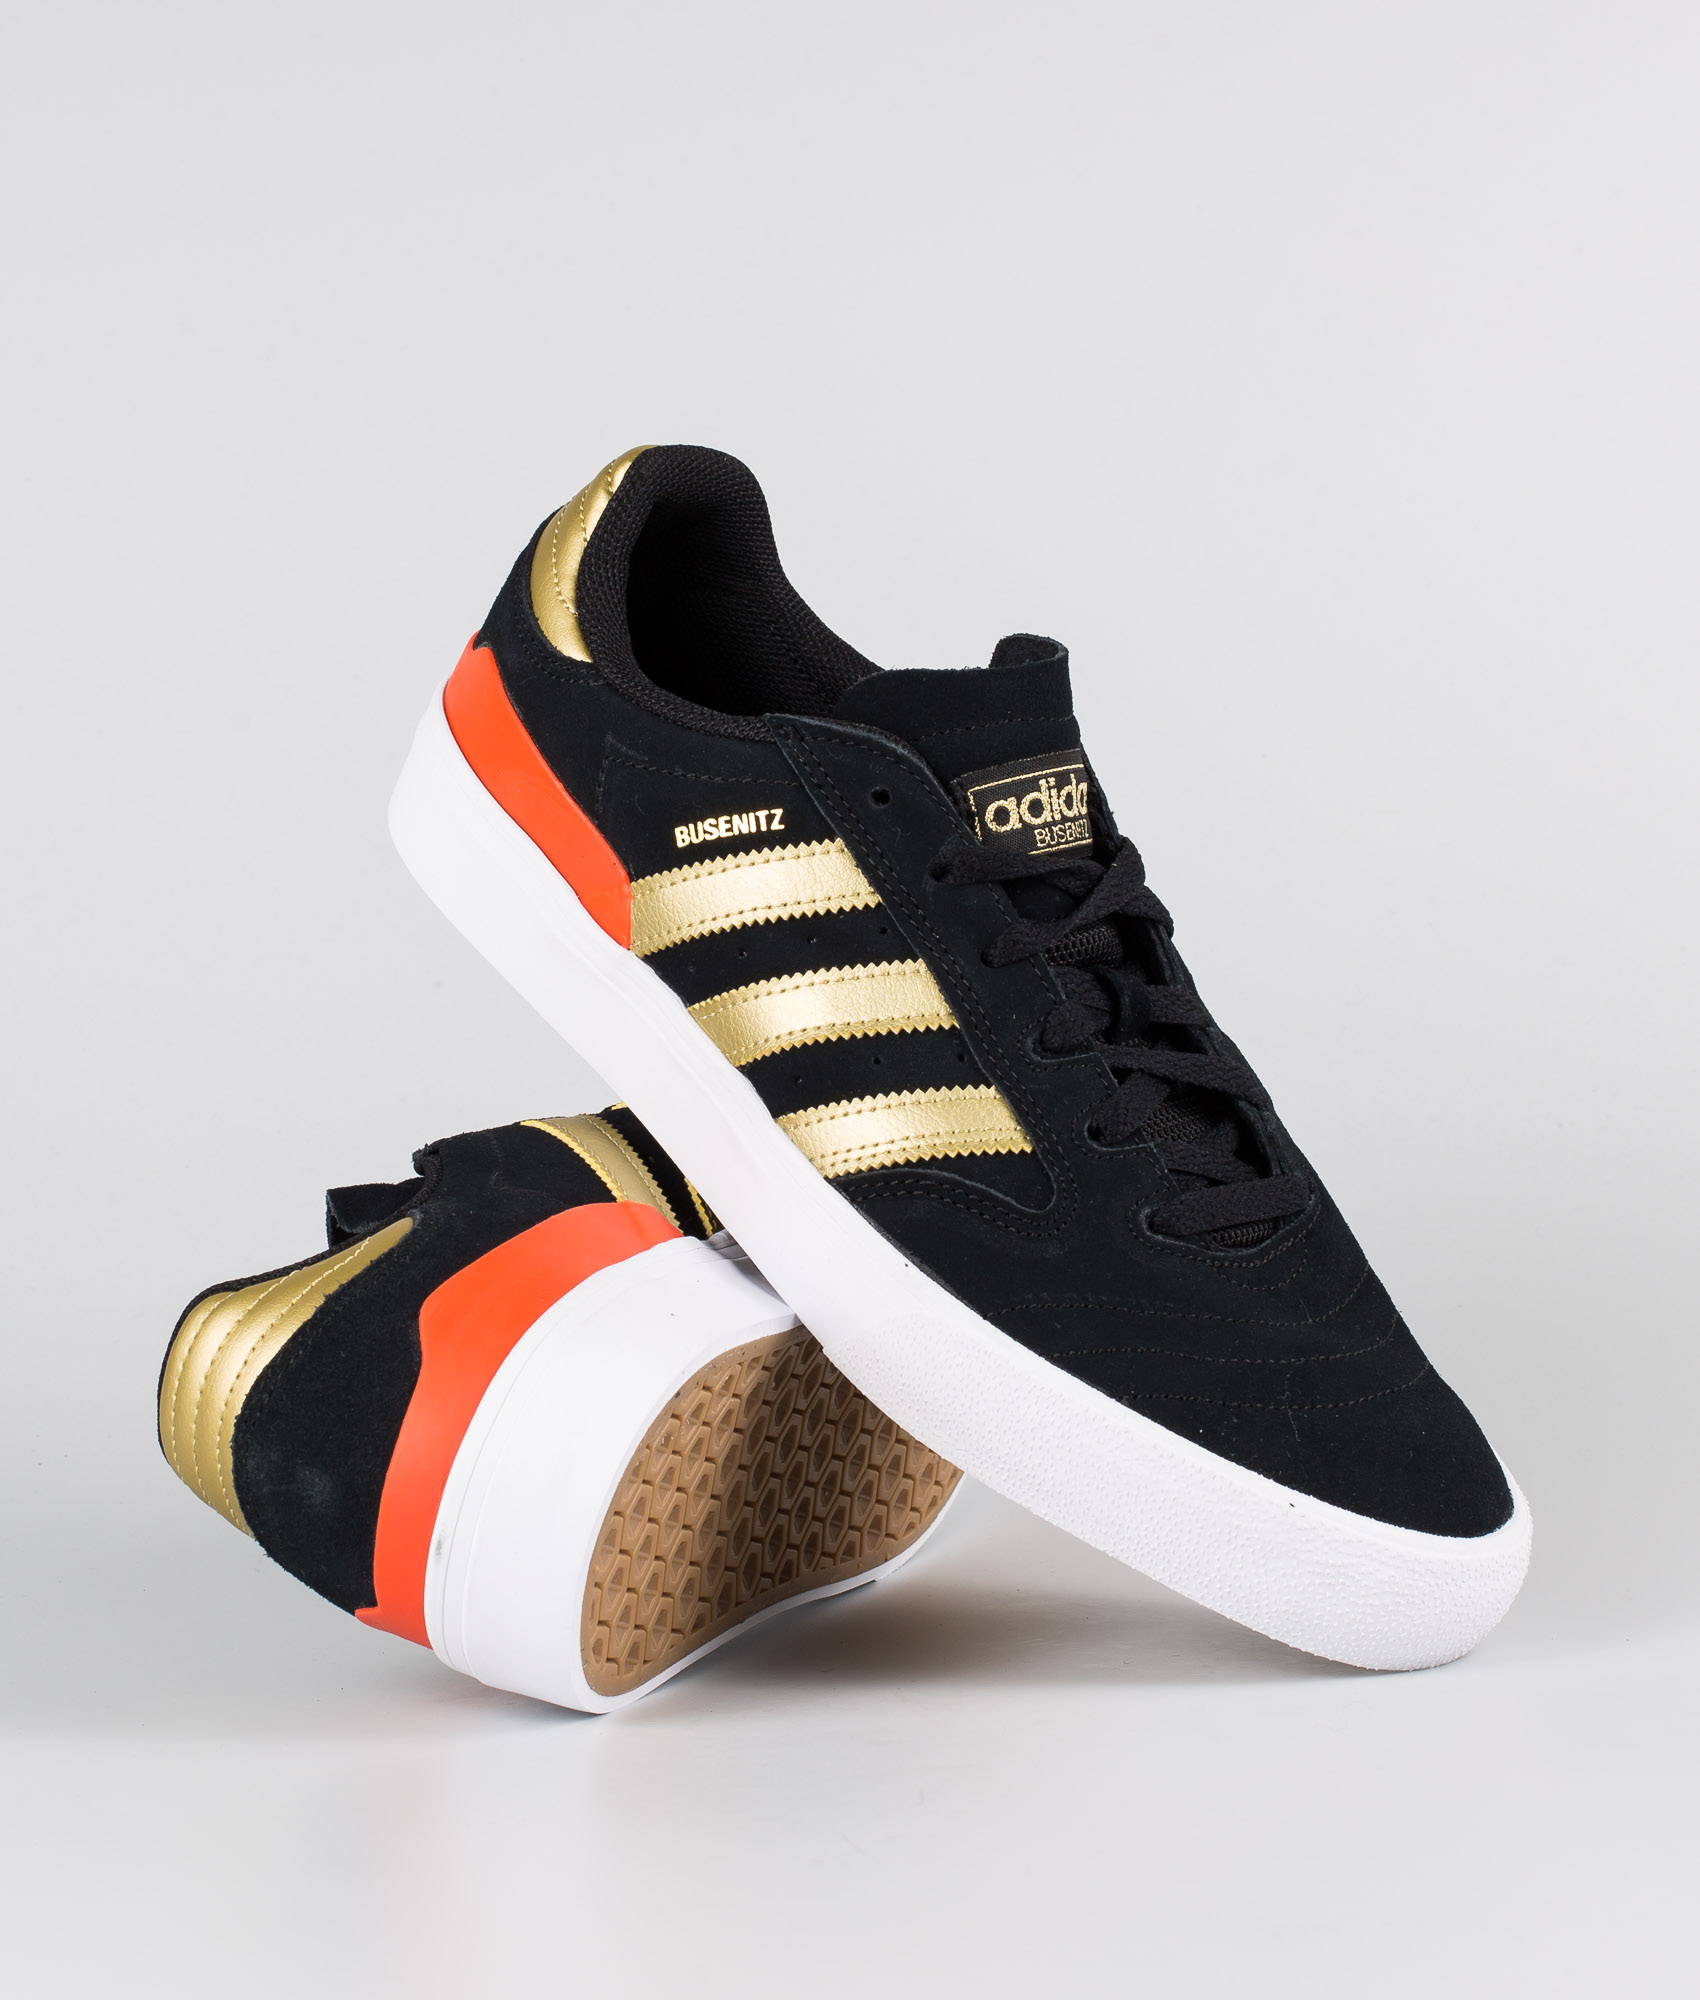 red adidas skateboarding shoes